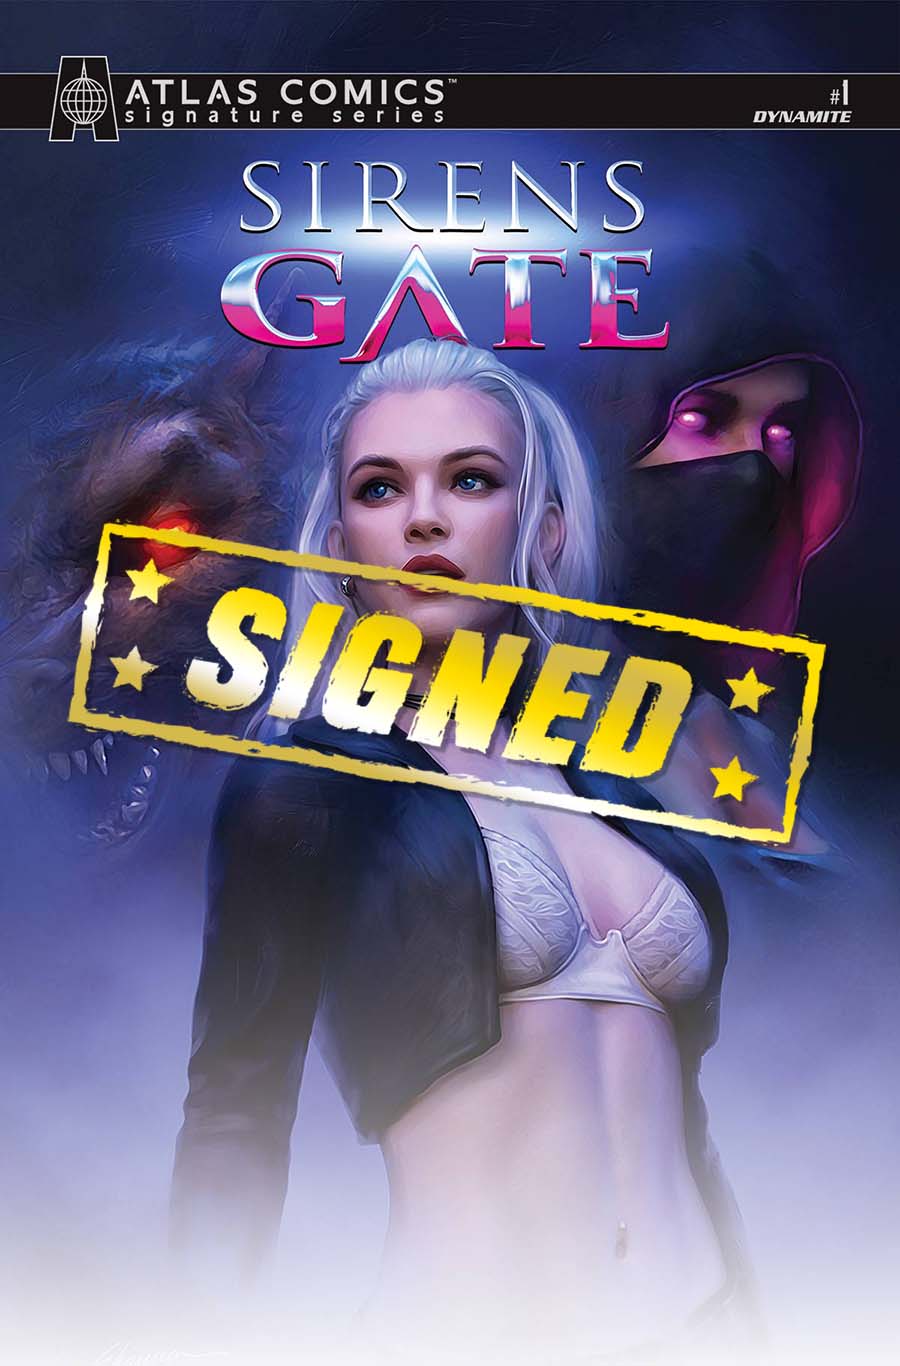 Sirens Gate #1 Cover C Atlas Comics Signature Edition Signed By Shannon Maer